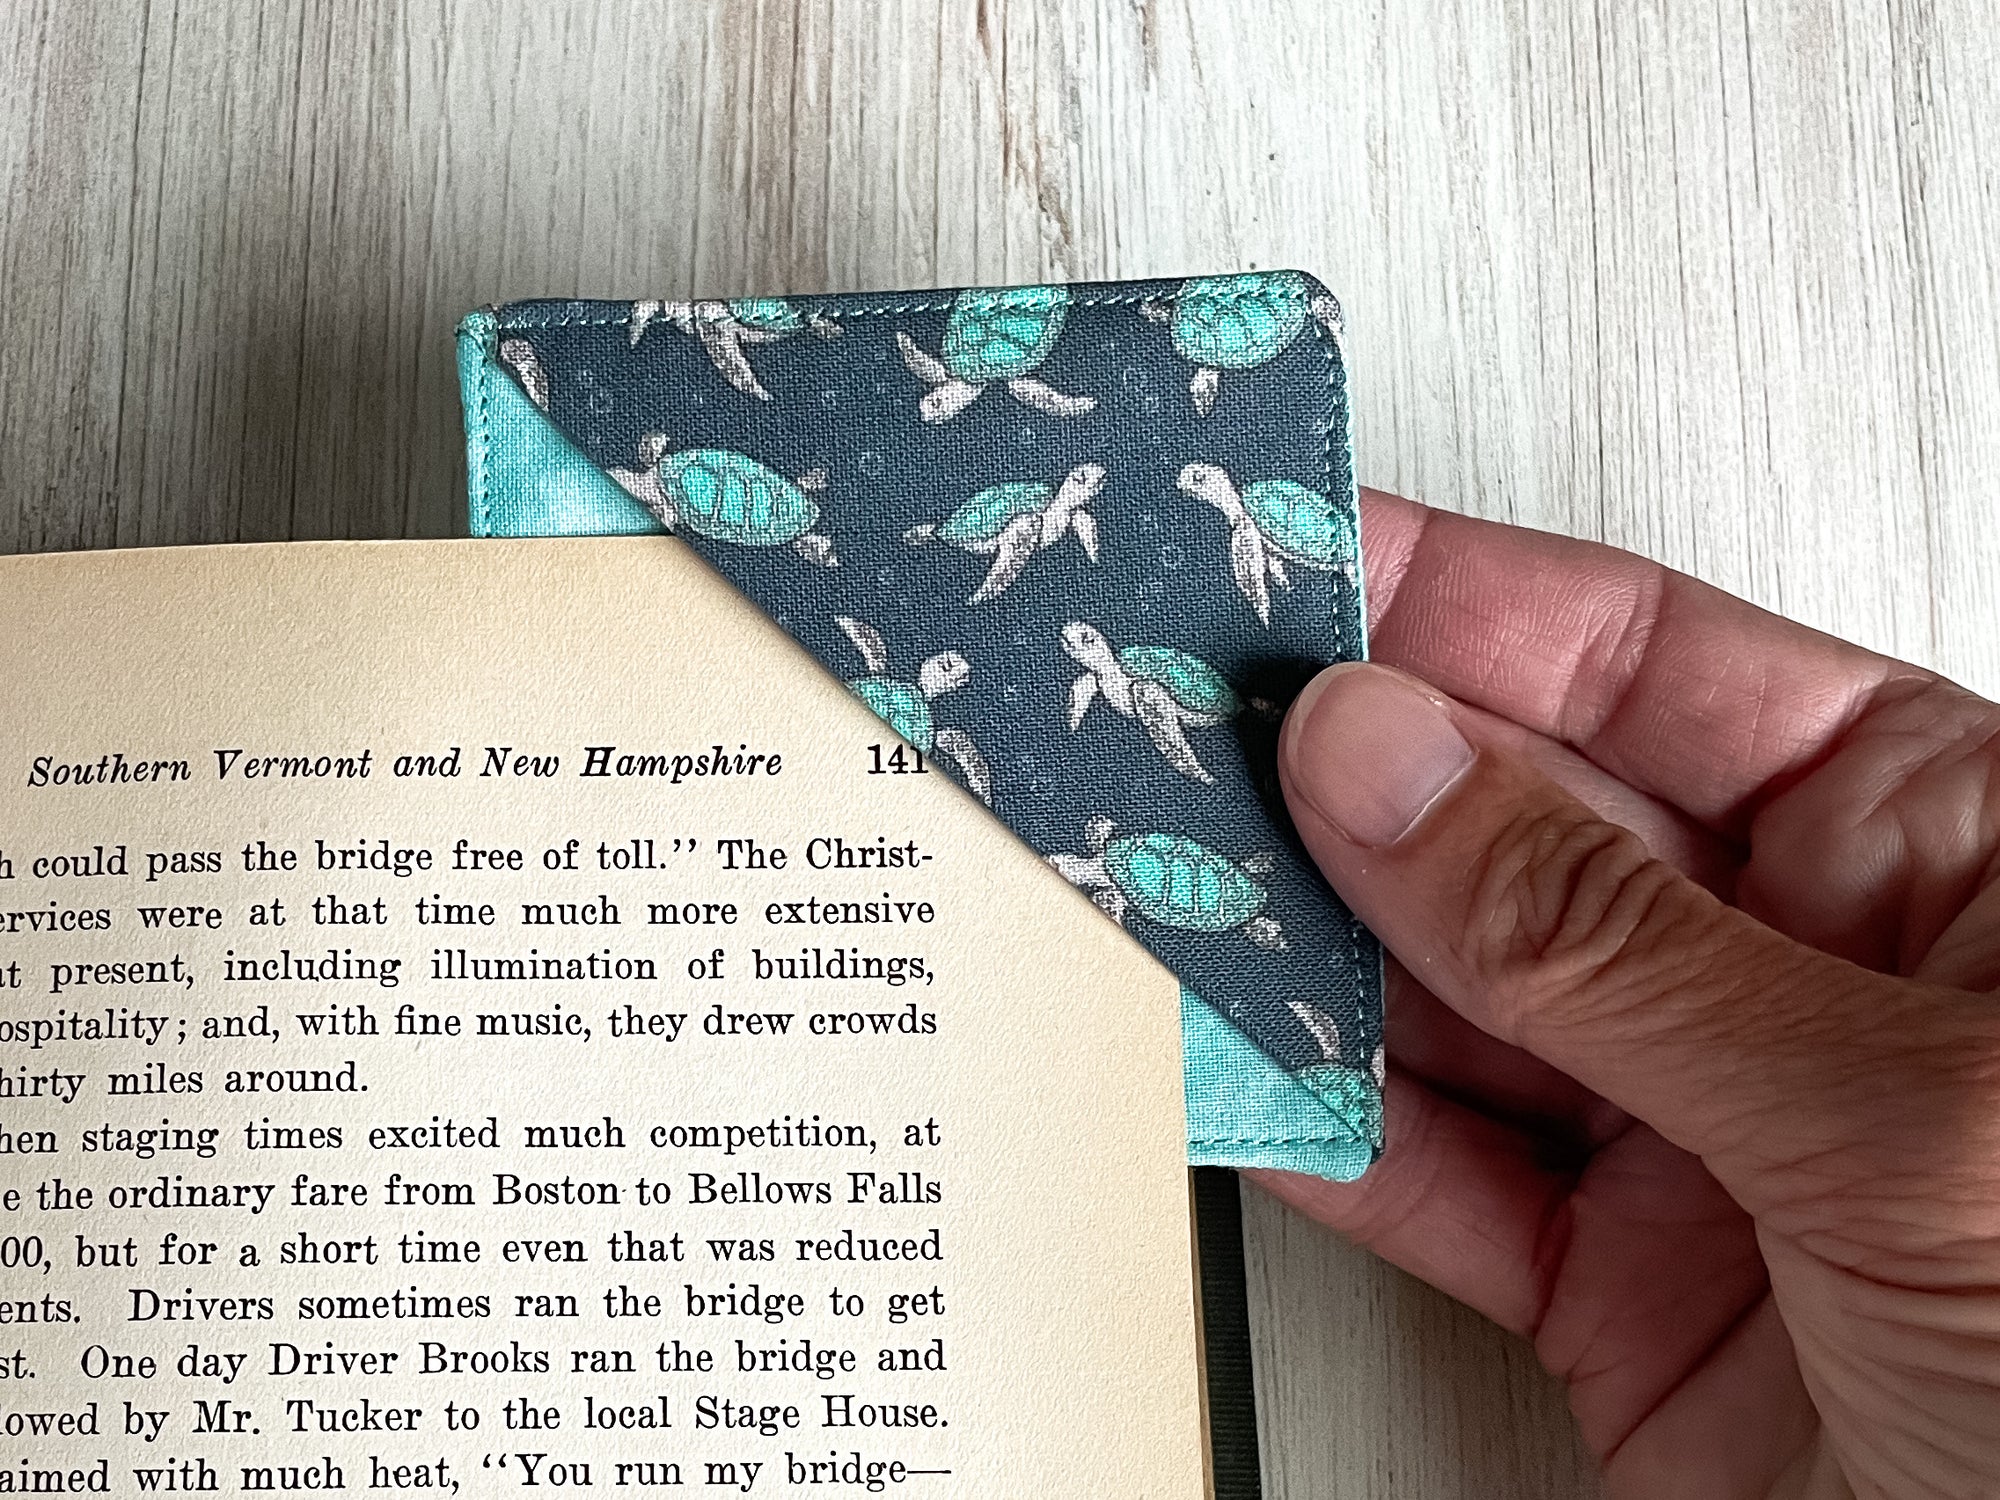 A handmade corner bookmark made from a fun turtle themed cotton fabric in shades of aqua and navy blue.  The page marker is square and is being shown sliding over the corner of a page in a book.